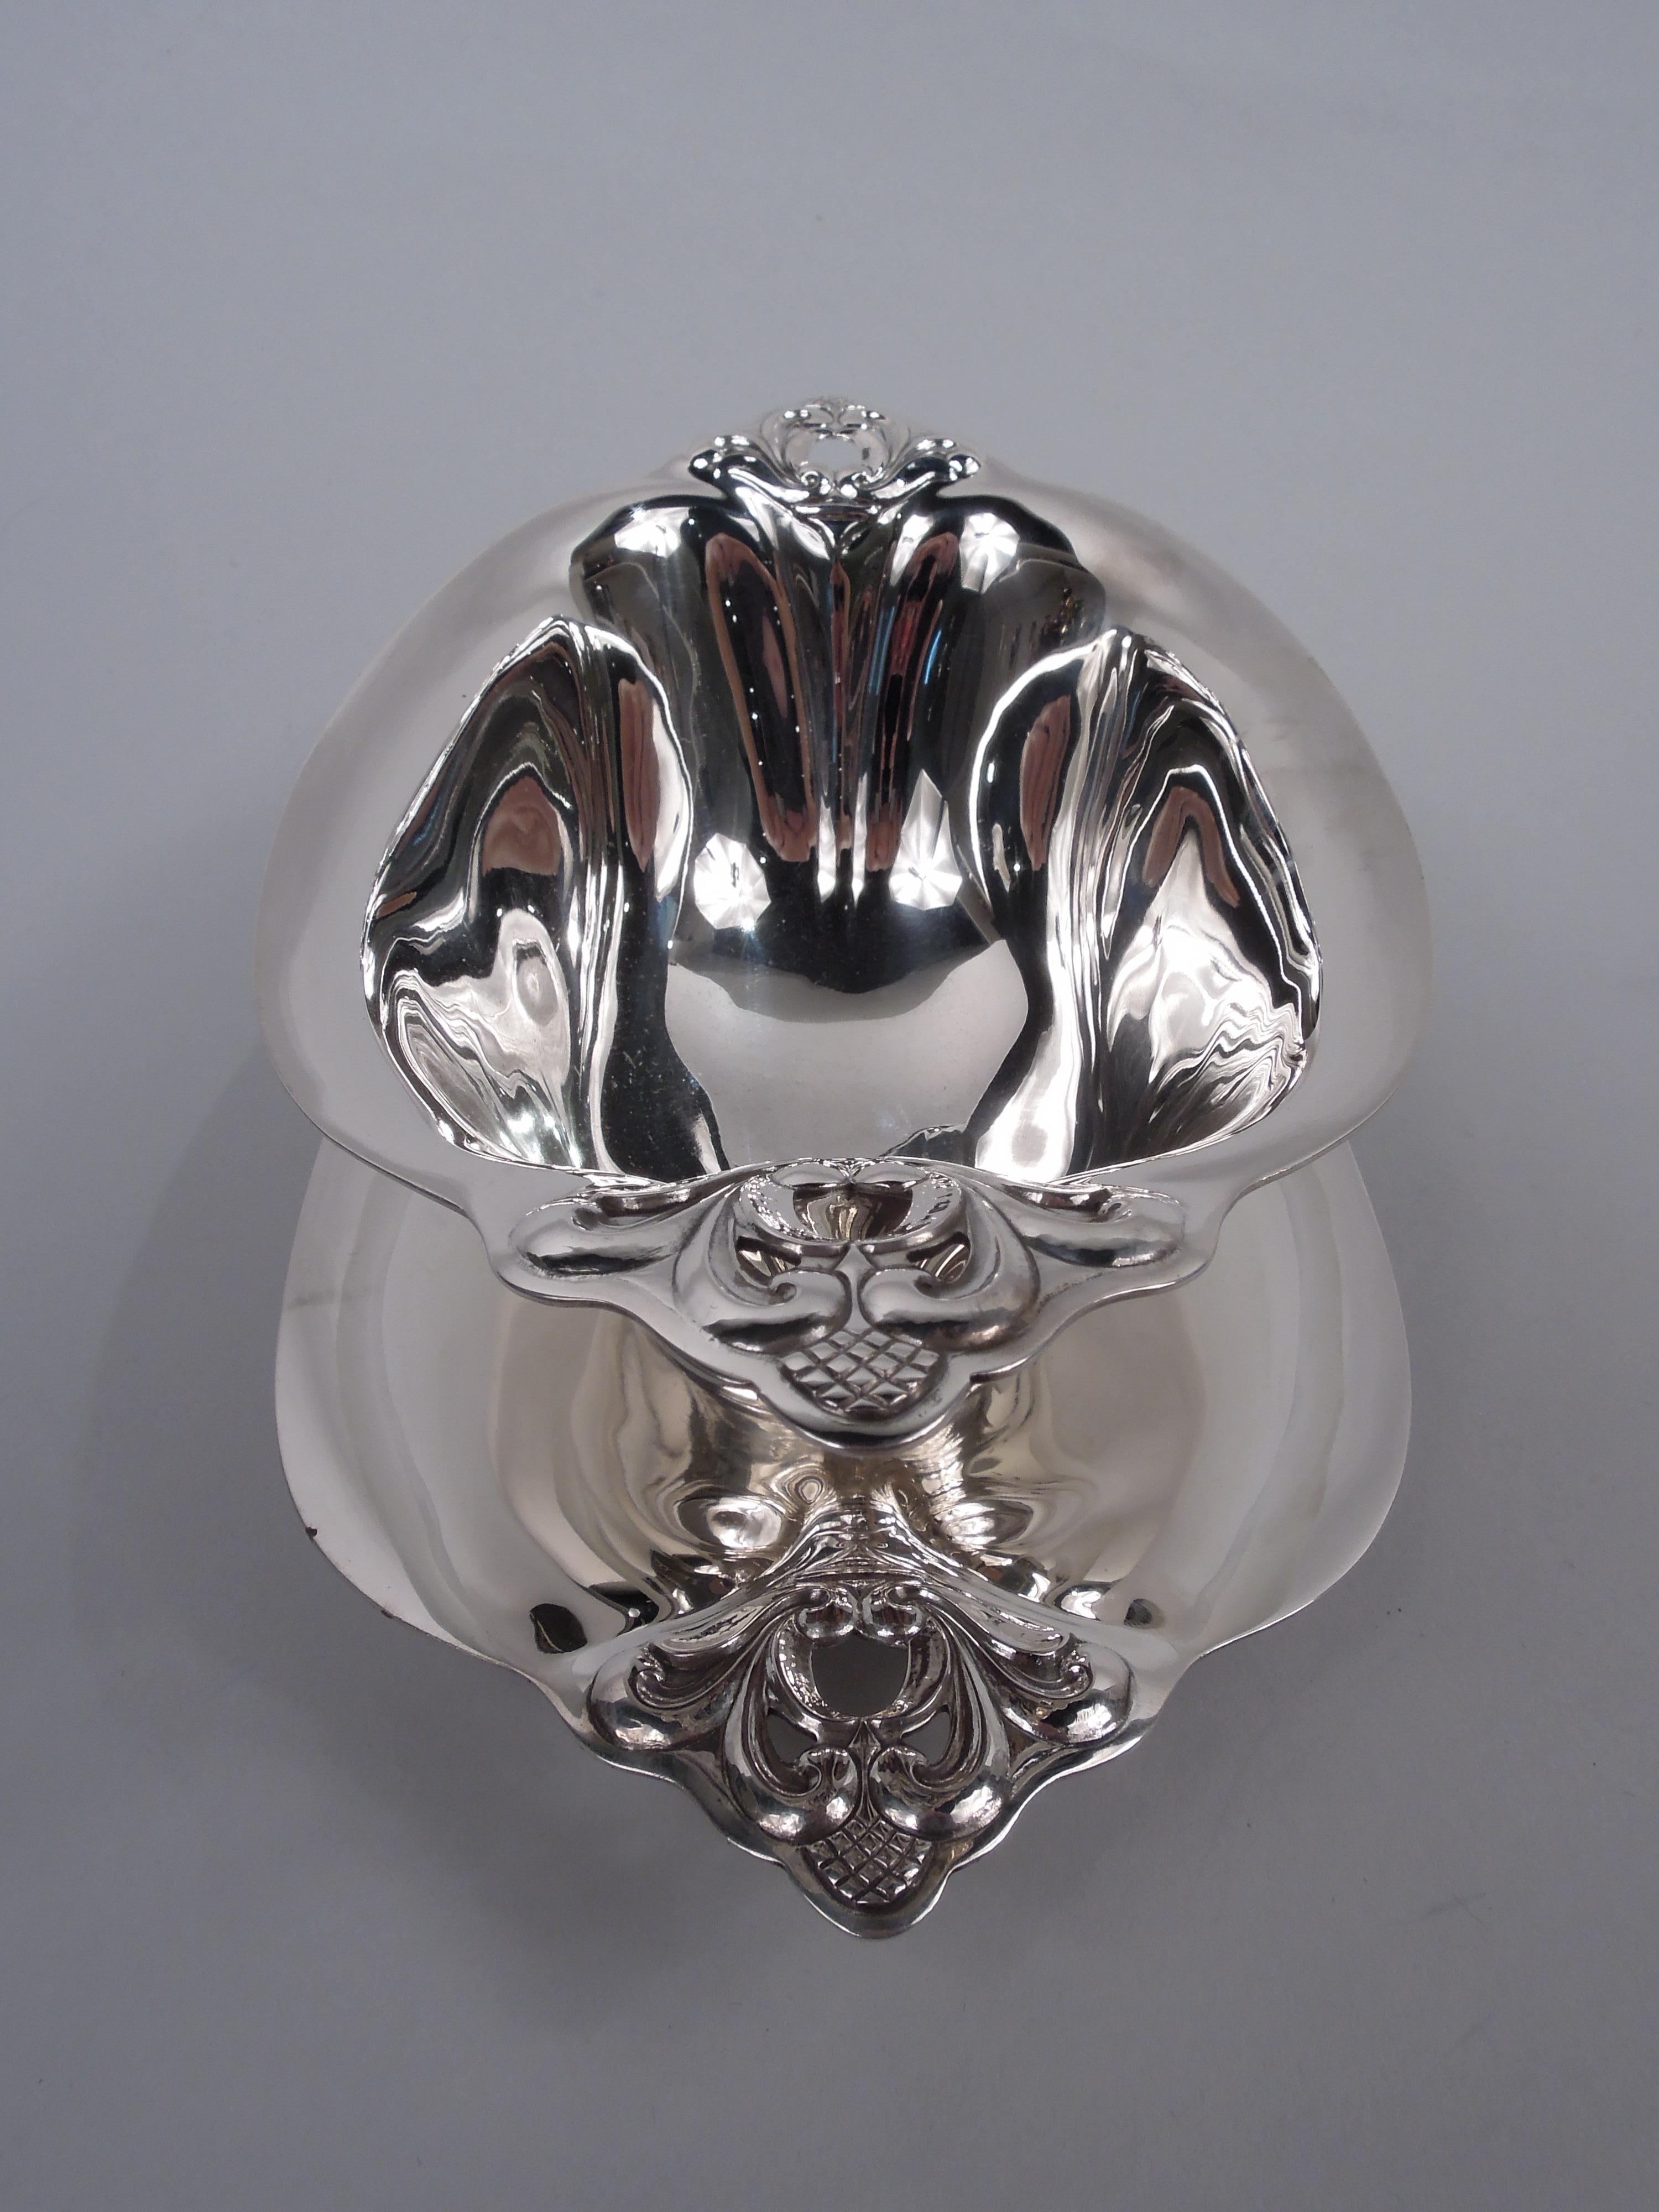 American International Royal Danish Sterling Silver Sauce Bowl on Stand For Sale